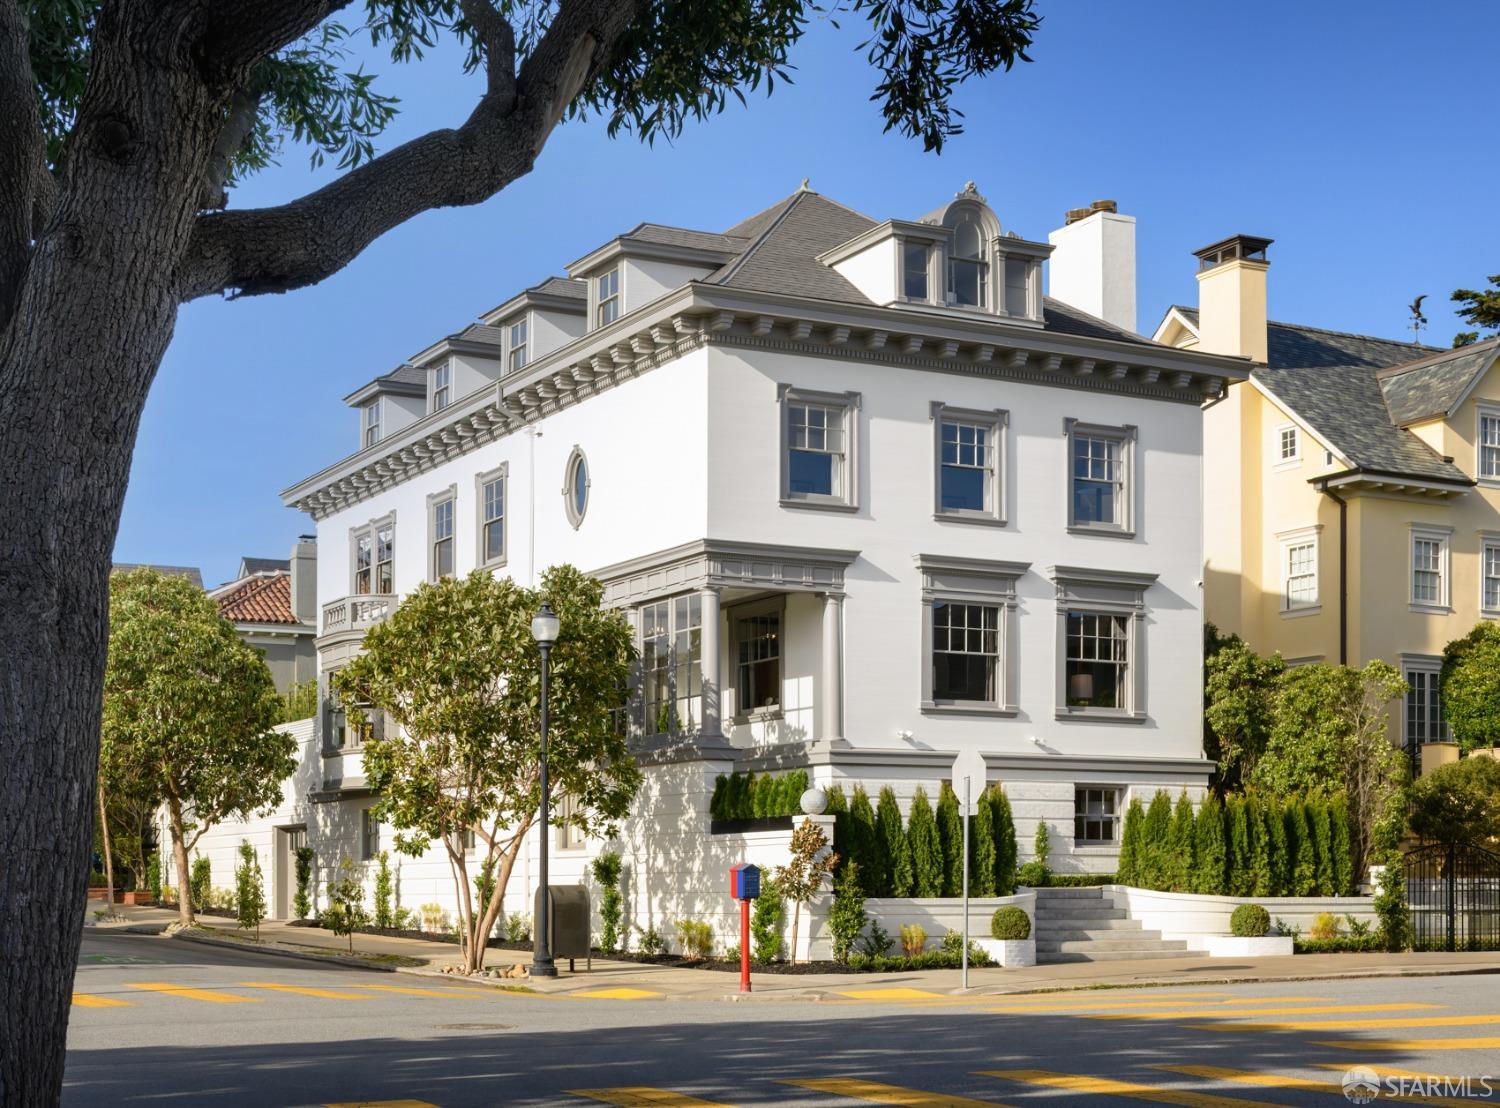 Sited on a prominent corner in Presidio Heights, this stately home offers the rare combination of sought-after scale, highly desirable family amenities, with a walk-out garden, and privacy. Built in 1909 and brought into the modern world by internationally acclaimed architect Robert A.M. Stern, the home sits commandingly above street level providing unexpected privacy and light throughout. A beautiful entry sequence guides visitors through lush greenery and into the glassed-in portico. Once inside, the home's grand scale is immediately evident with the center foyer filled with light and restored original architectural details. The main level is perfect for entertaining with the formal living and dining room, and a robust kitchen opening to the garden. The home's formal pedigree is beautifully balanced with elevated finishes, fixtures, and lighting, creating spaces equally suited for large-scale entertaining or family gatherings. Second level with primary suite, 2 large en-suite bedrooms, oak-clad office. Top level: 3 distinct rooms with city outlooks. Lower level hosts a game room, media room, and gym.  Boasting a walkout garden and sport court directly off the main level, this home epitomizes purpose, provenance, and the best family living can offer.